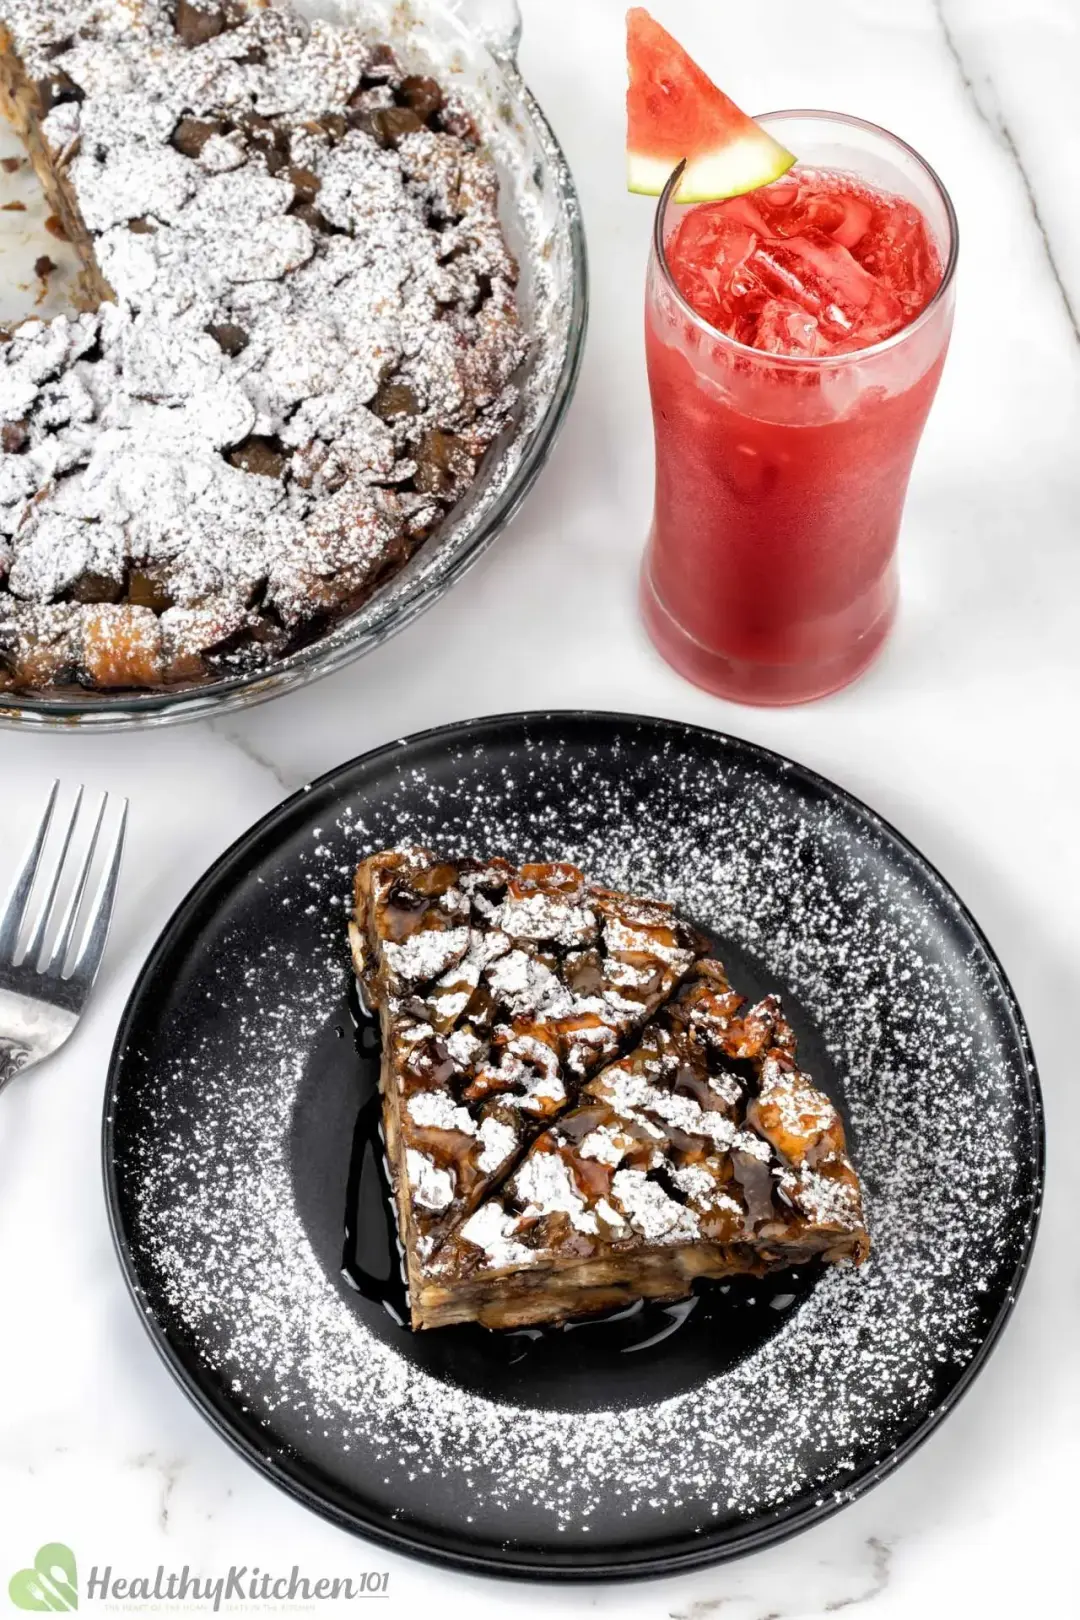 A black plate of French toast casserole dusted with powdered sugar, next to a large sweet casserole and iced watermelon juice